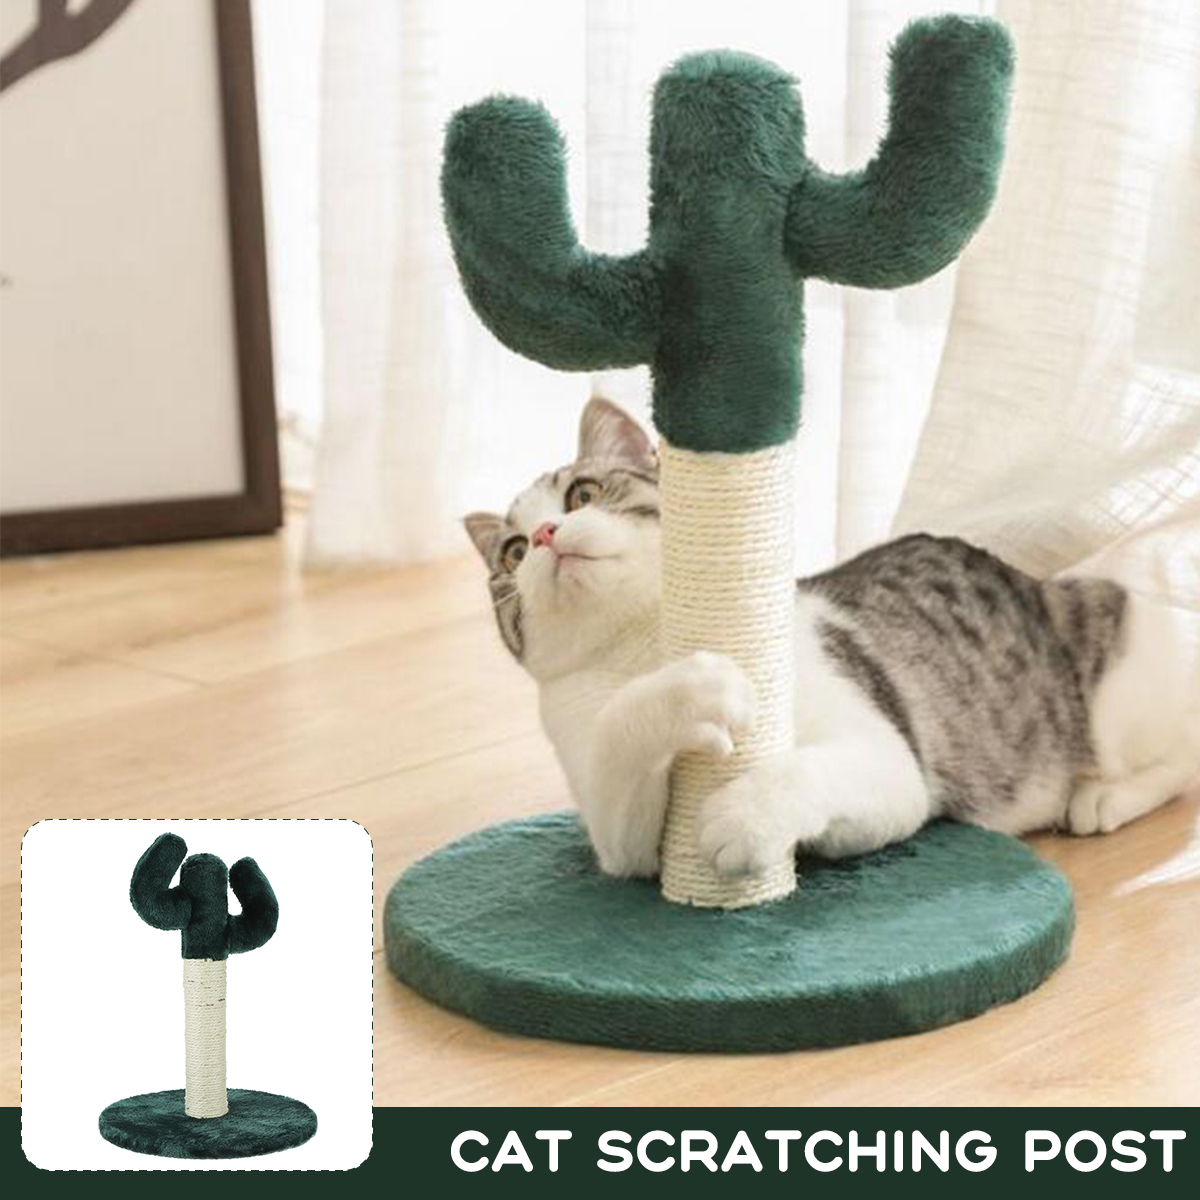 Cute-Cactus-Pet-Cat-Tree-Toys-with-Ball-Scratcher-Posts-for-Cats-Kitten-Climbing-Tree-Cat-Toy-Protec-1914852-2